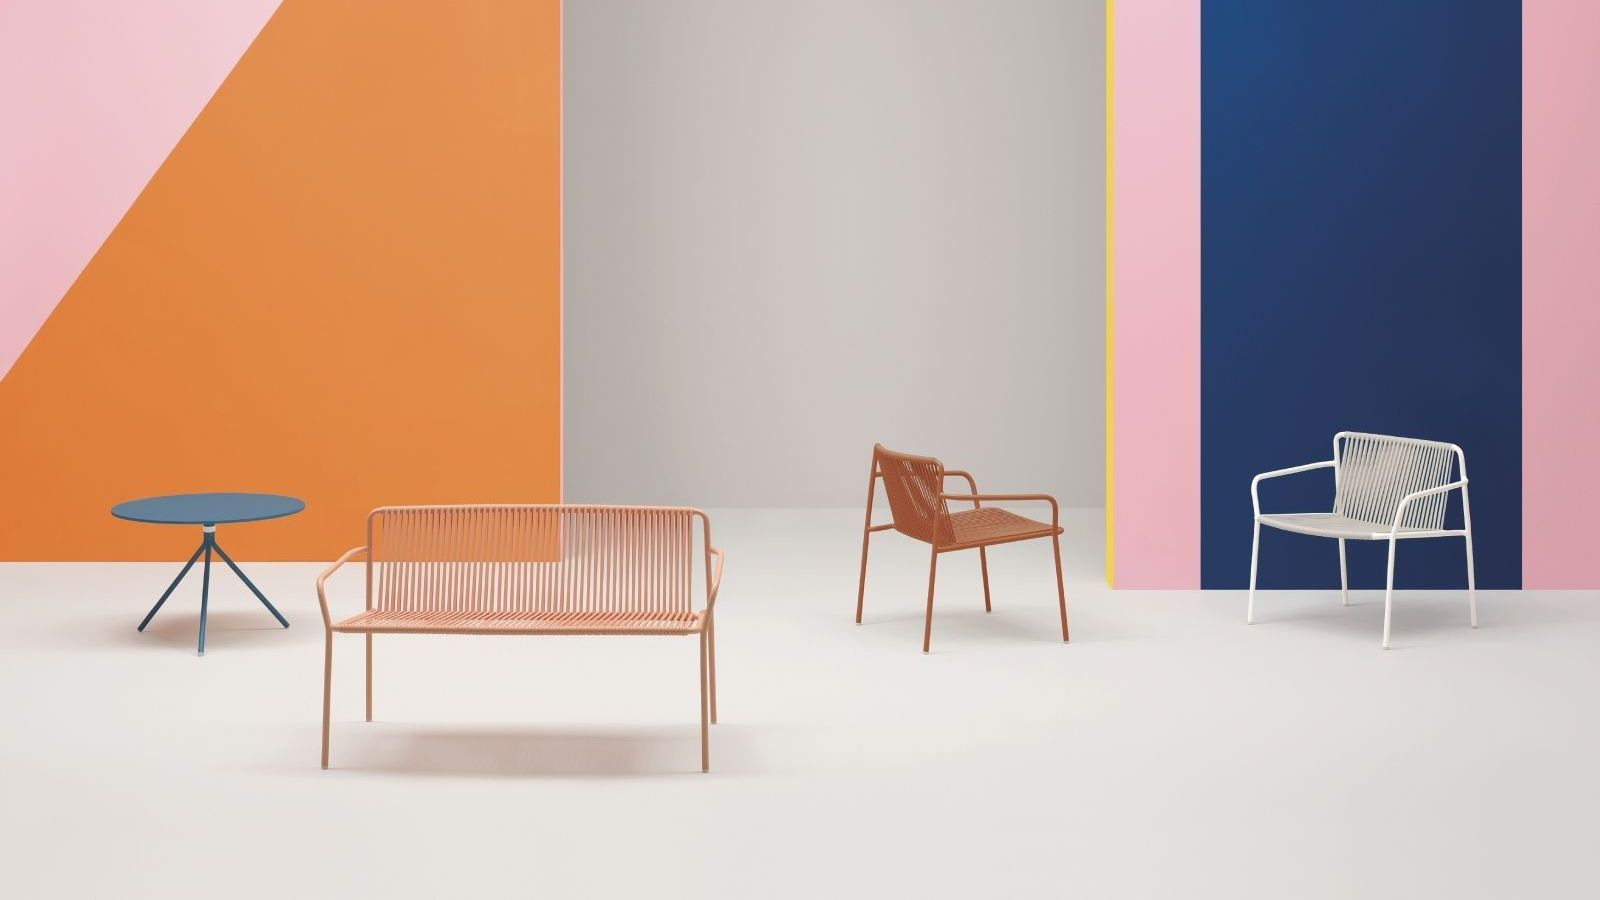 2 Pedrali chairs and 1 bench dotted around a large spacious room. There is a small table in the background too. The floors are white and the walls are pink, orange, yellow and blue. 